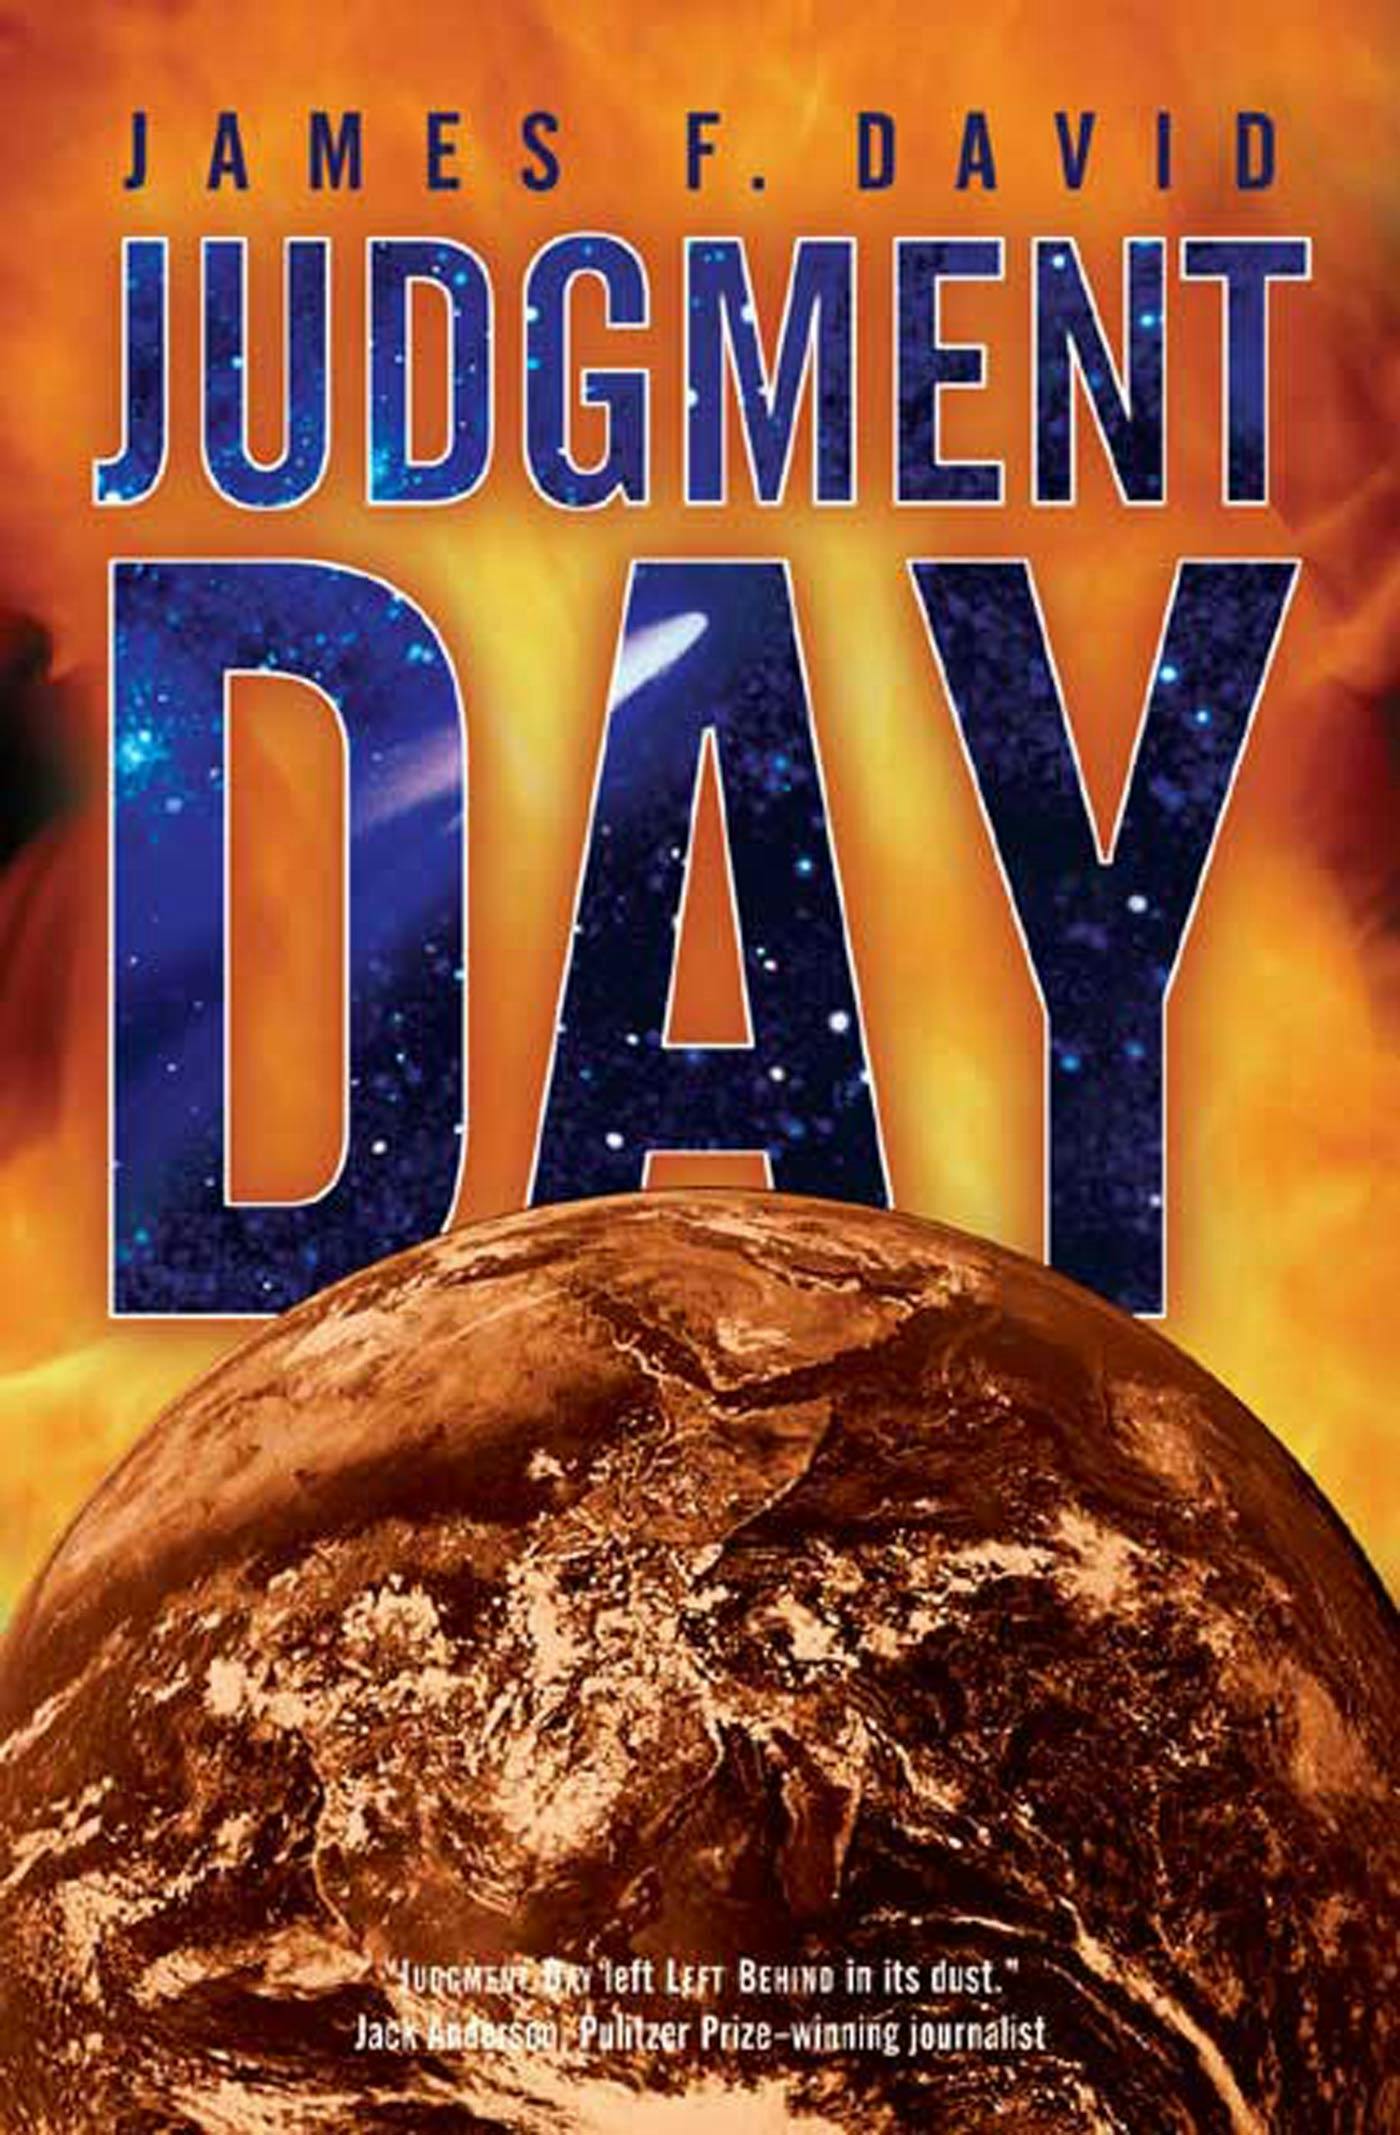 Cover for the book titled as: Judgment Day